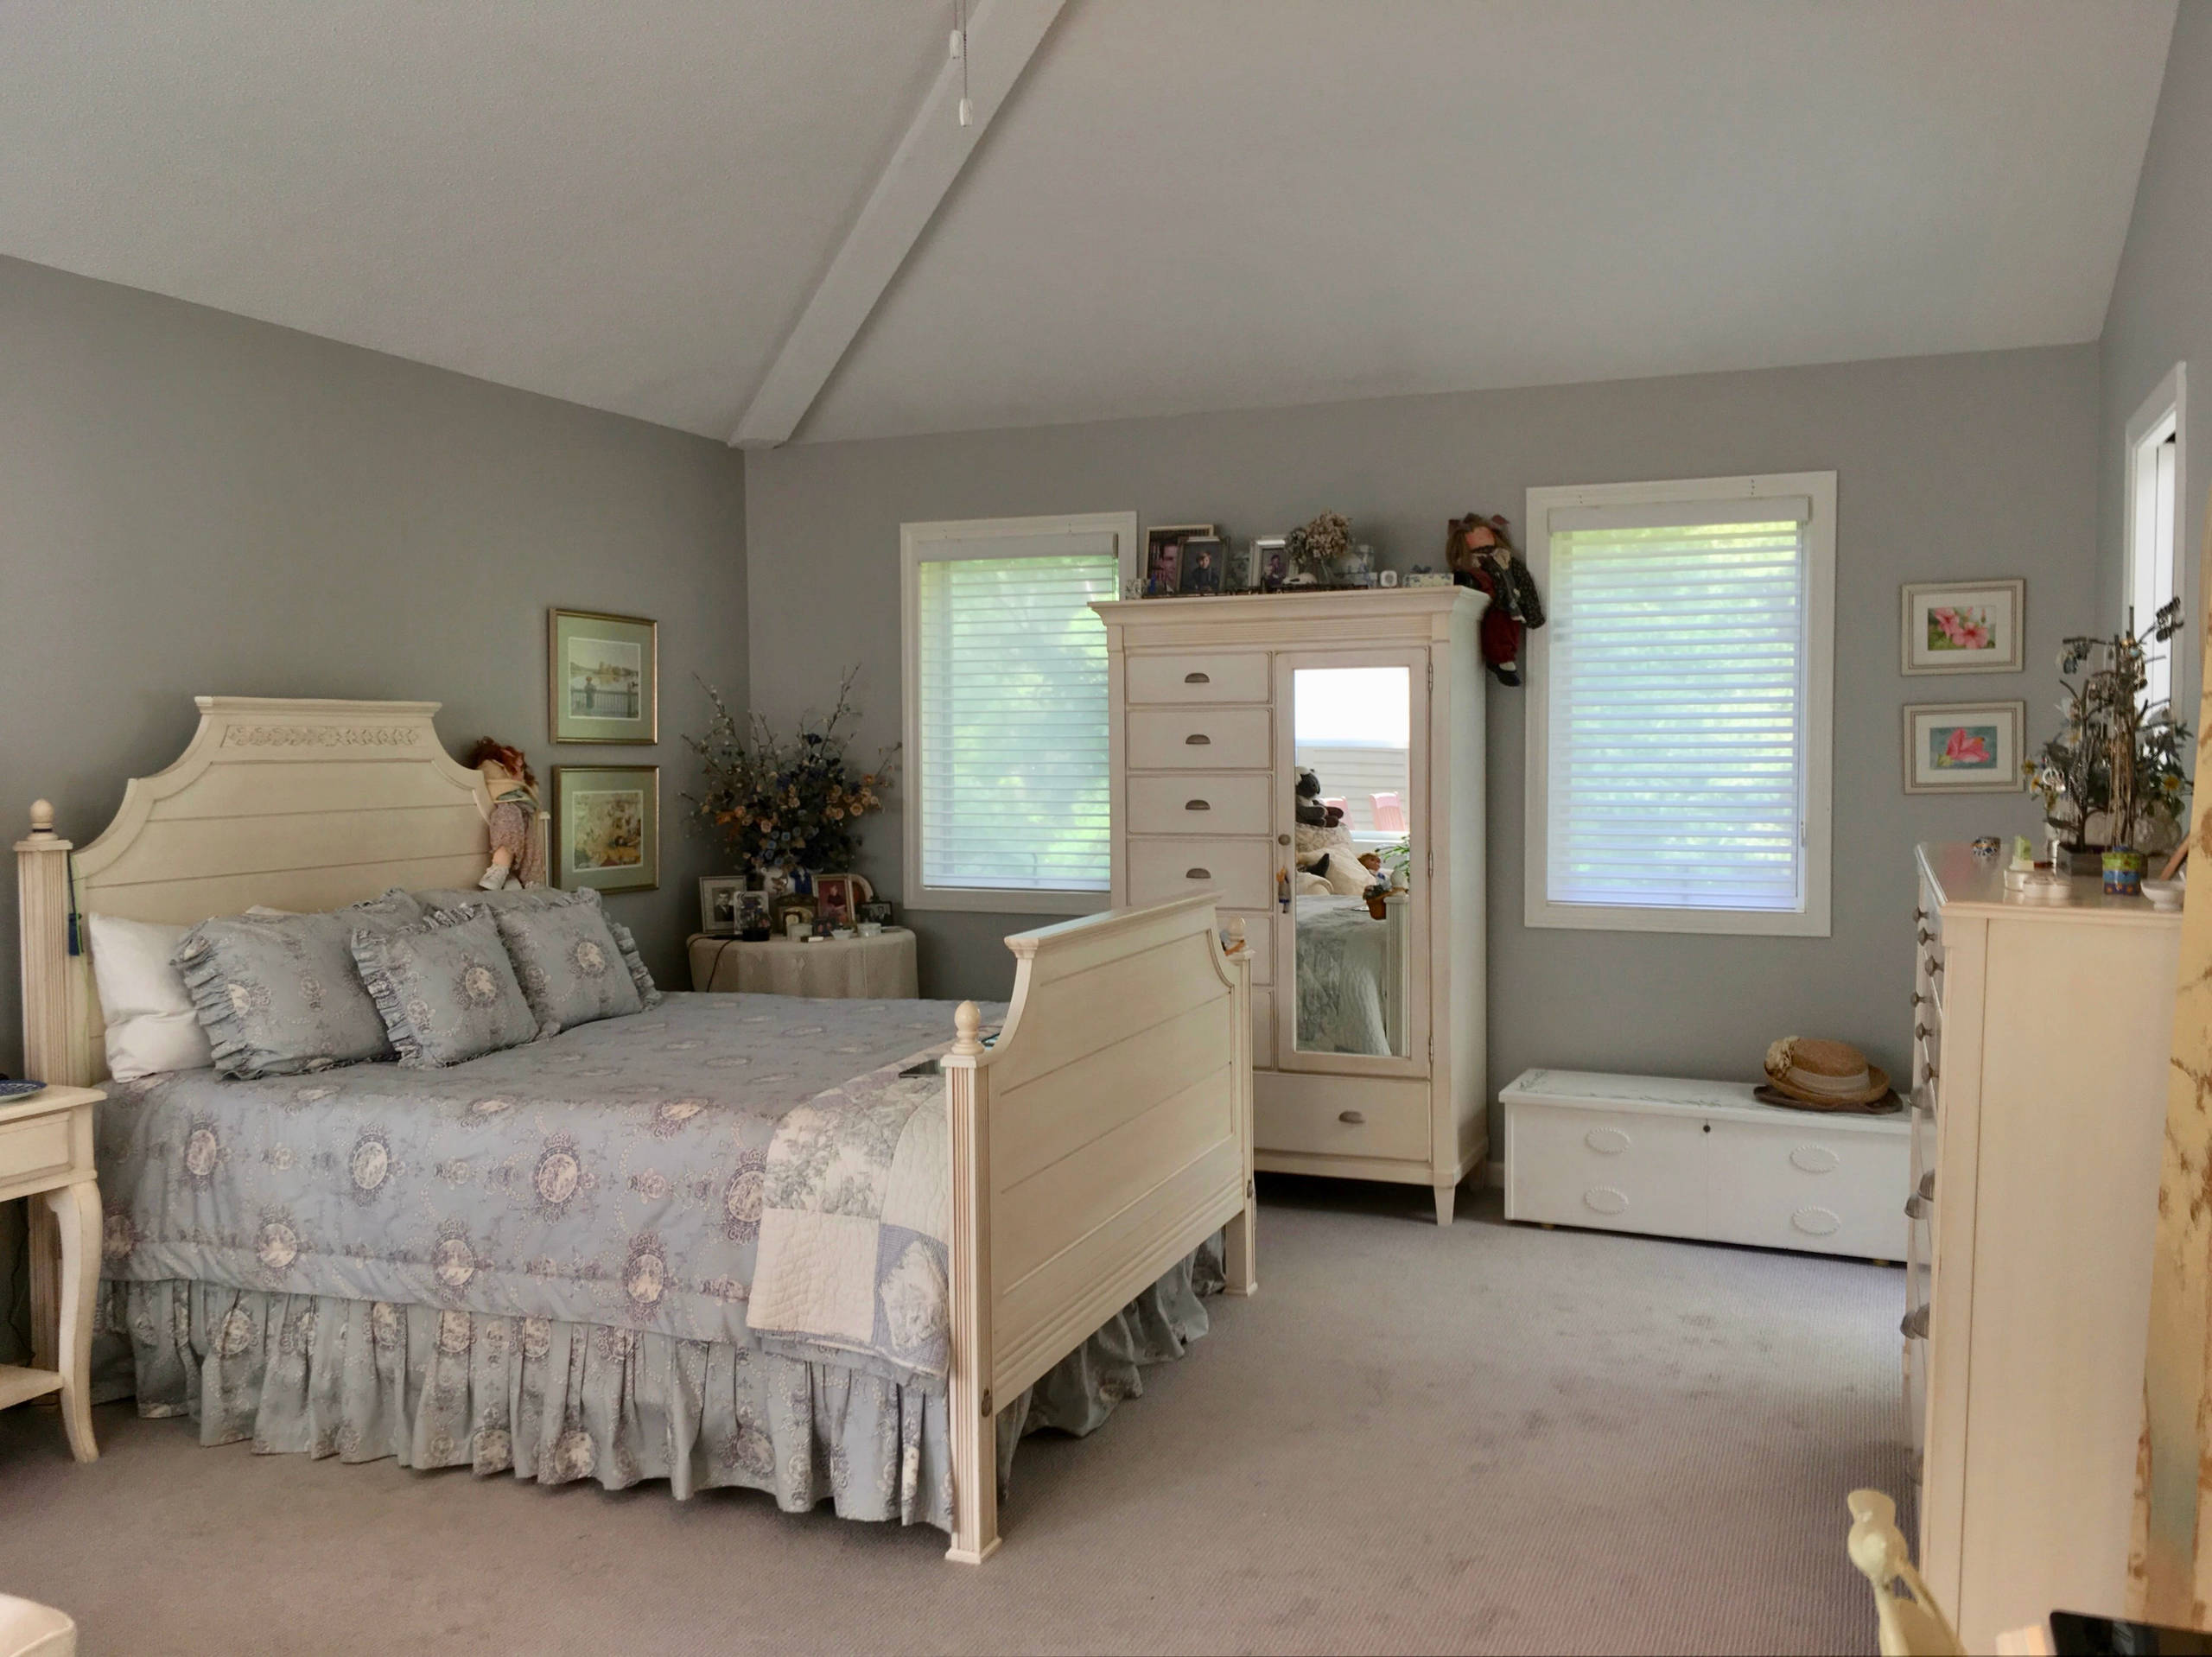 Peaceful & Cozy Cottage Bedroom with Silhouette Shadings